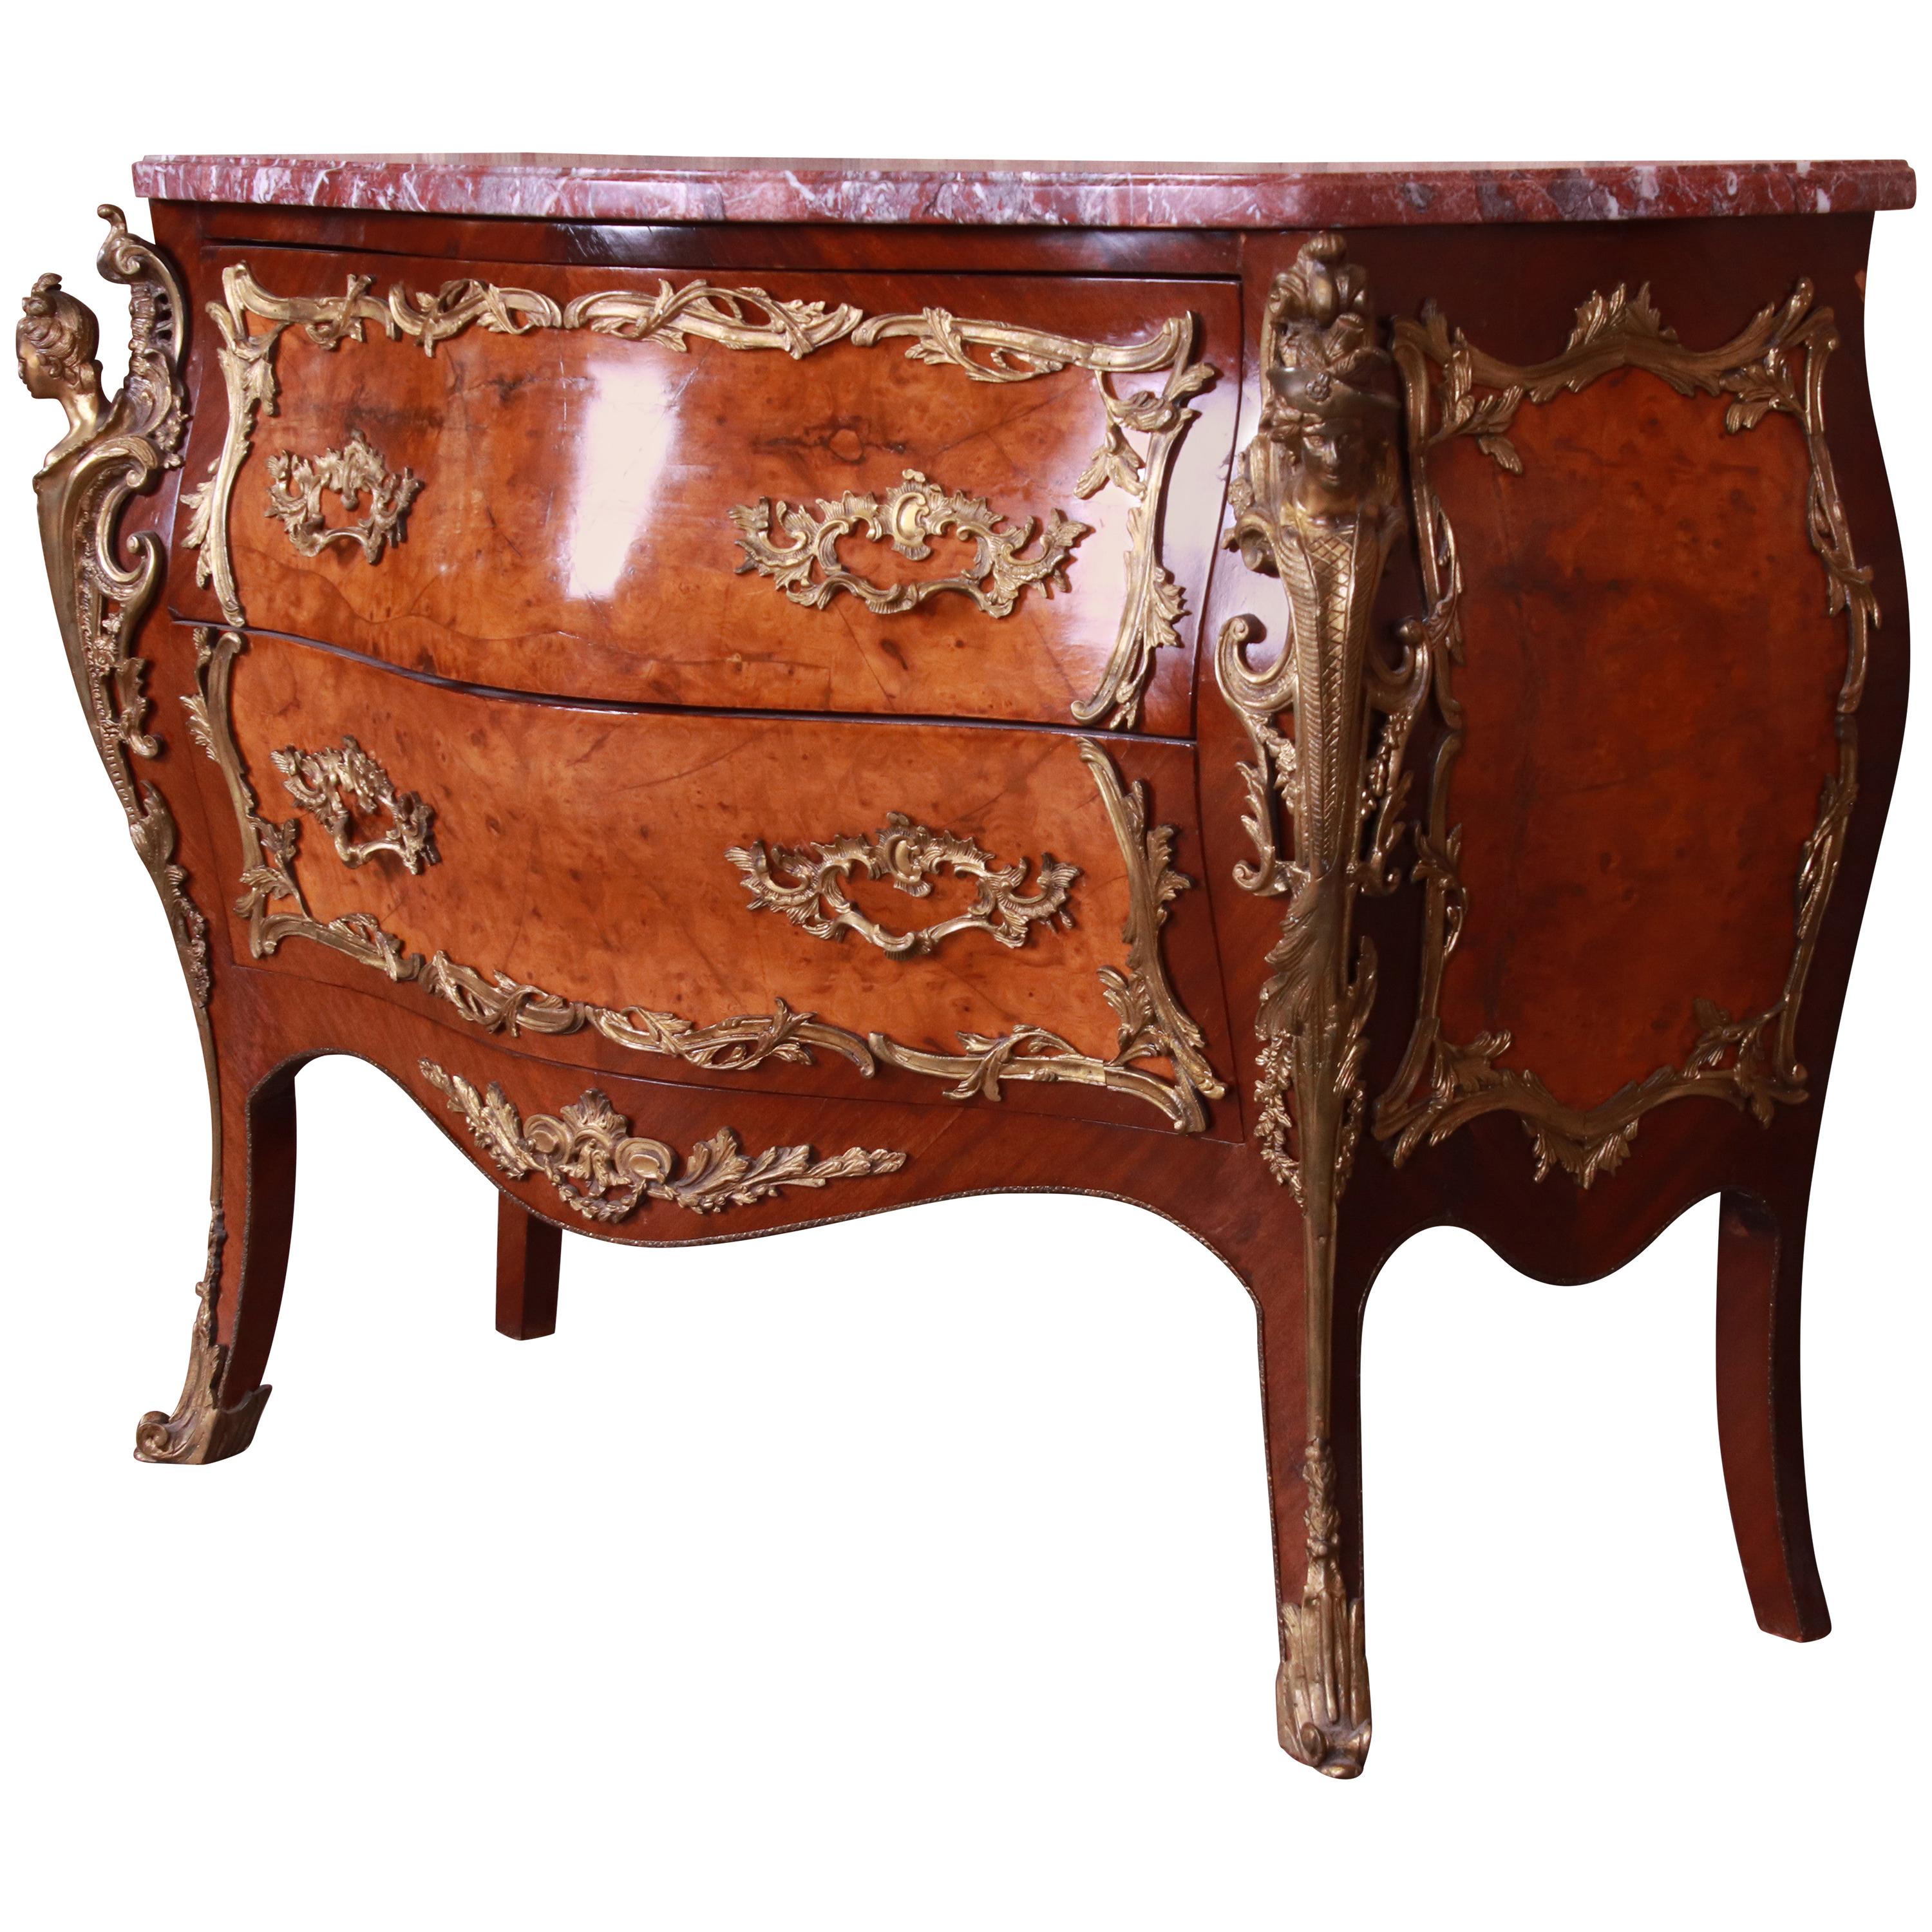 Antique French Louis XV Marble-Top Bombay Chest Commode with Mounted Ormolu